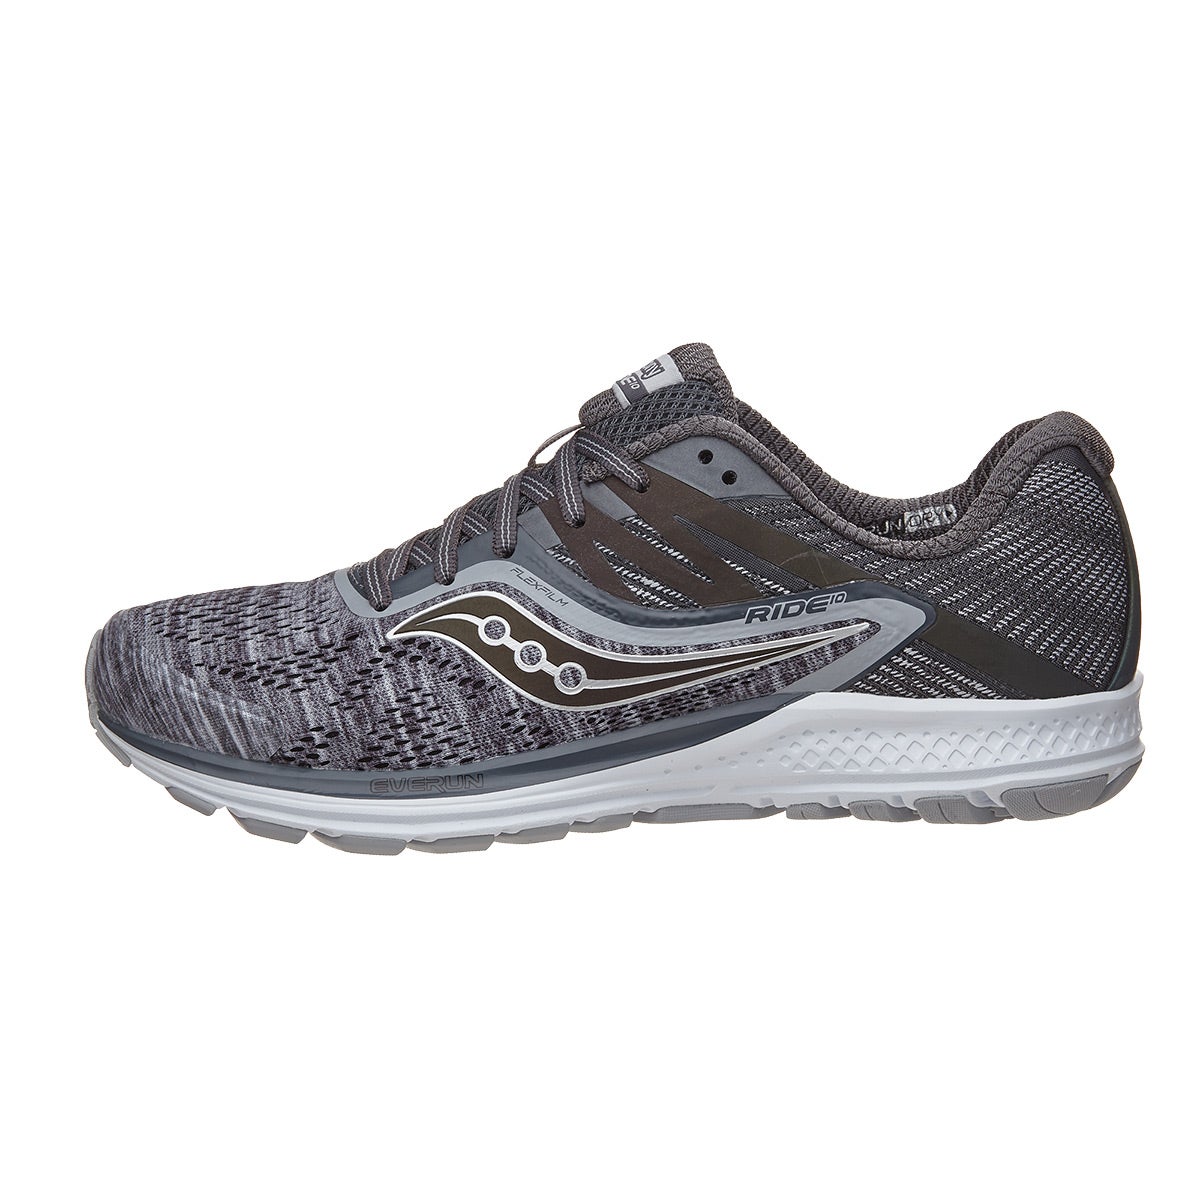 Saucony Ride 10 Men's Shoes Heathered 